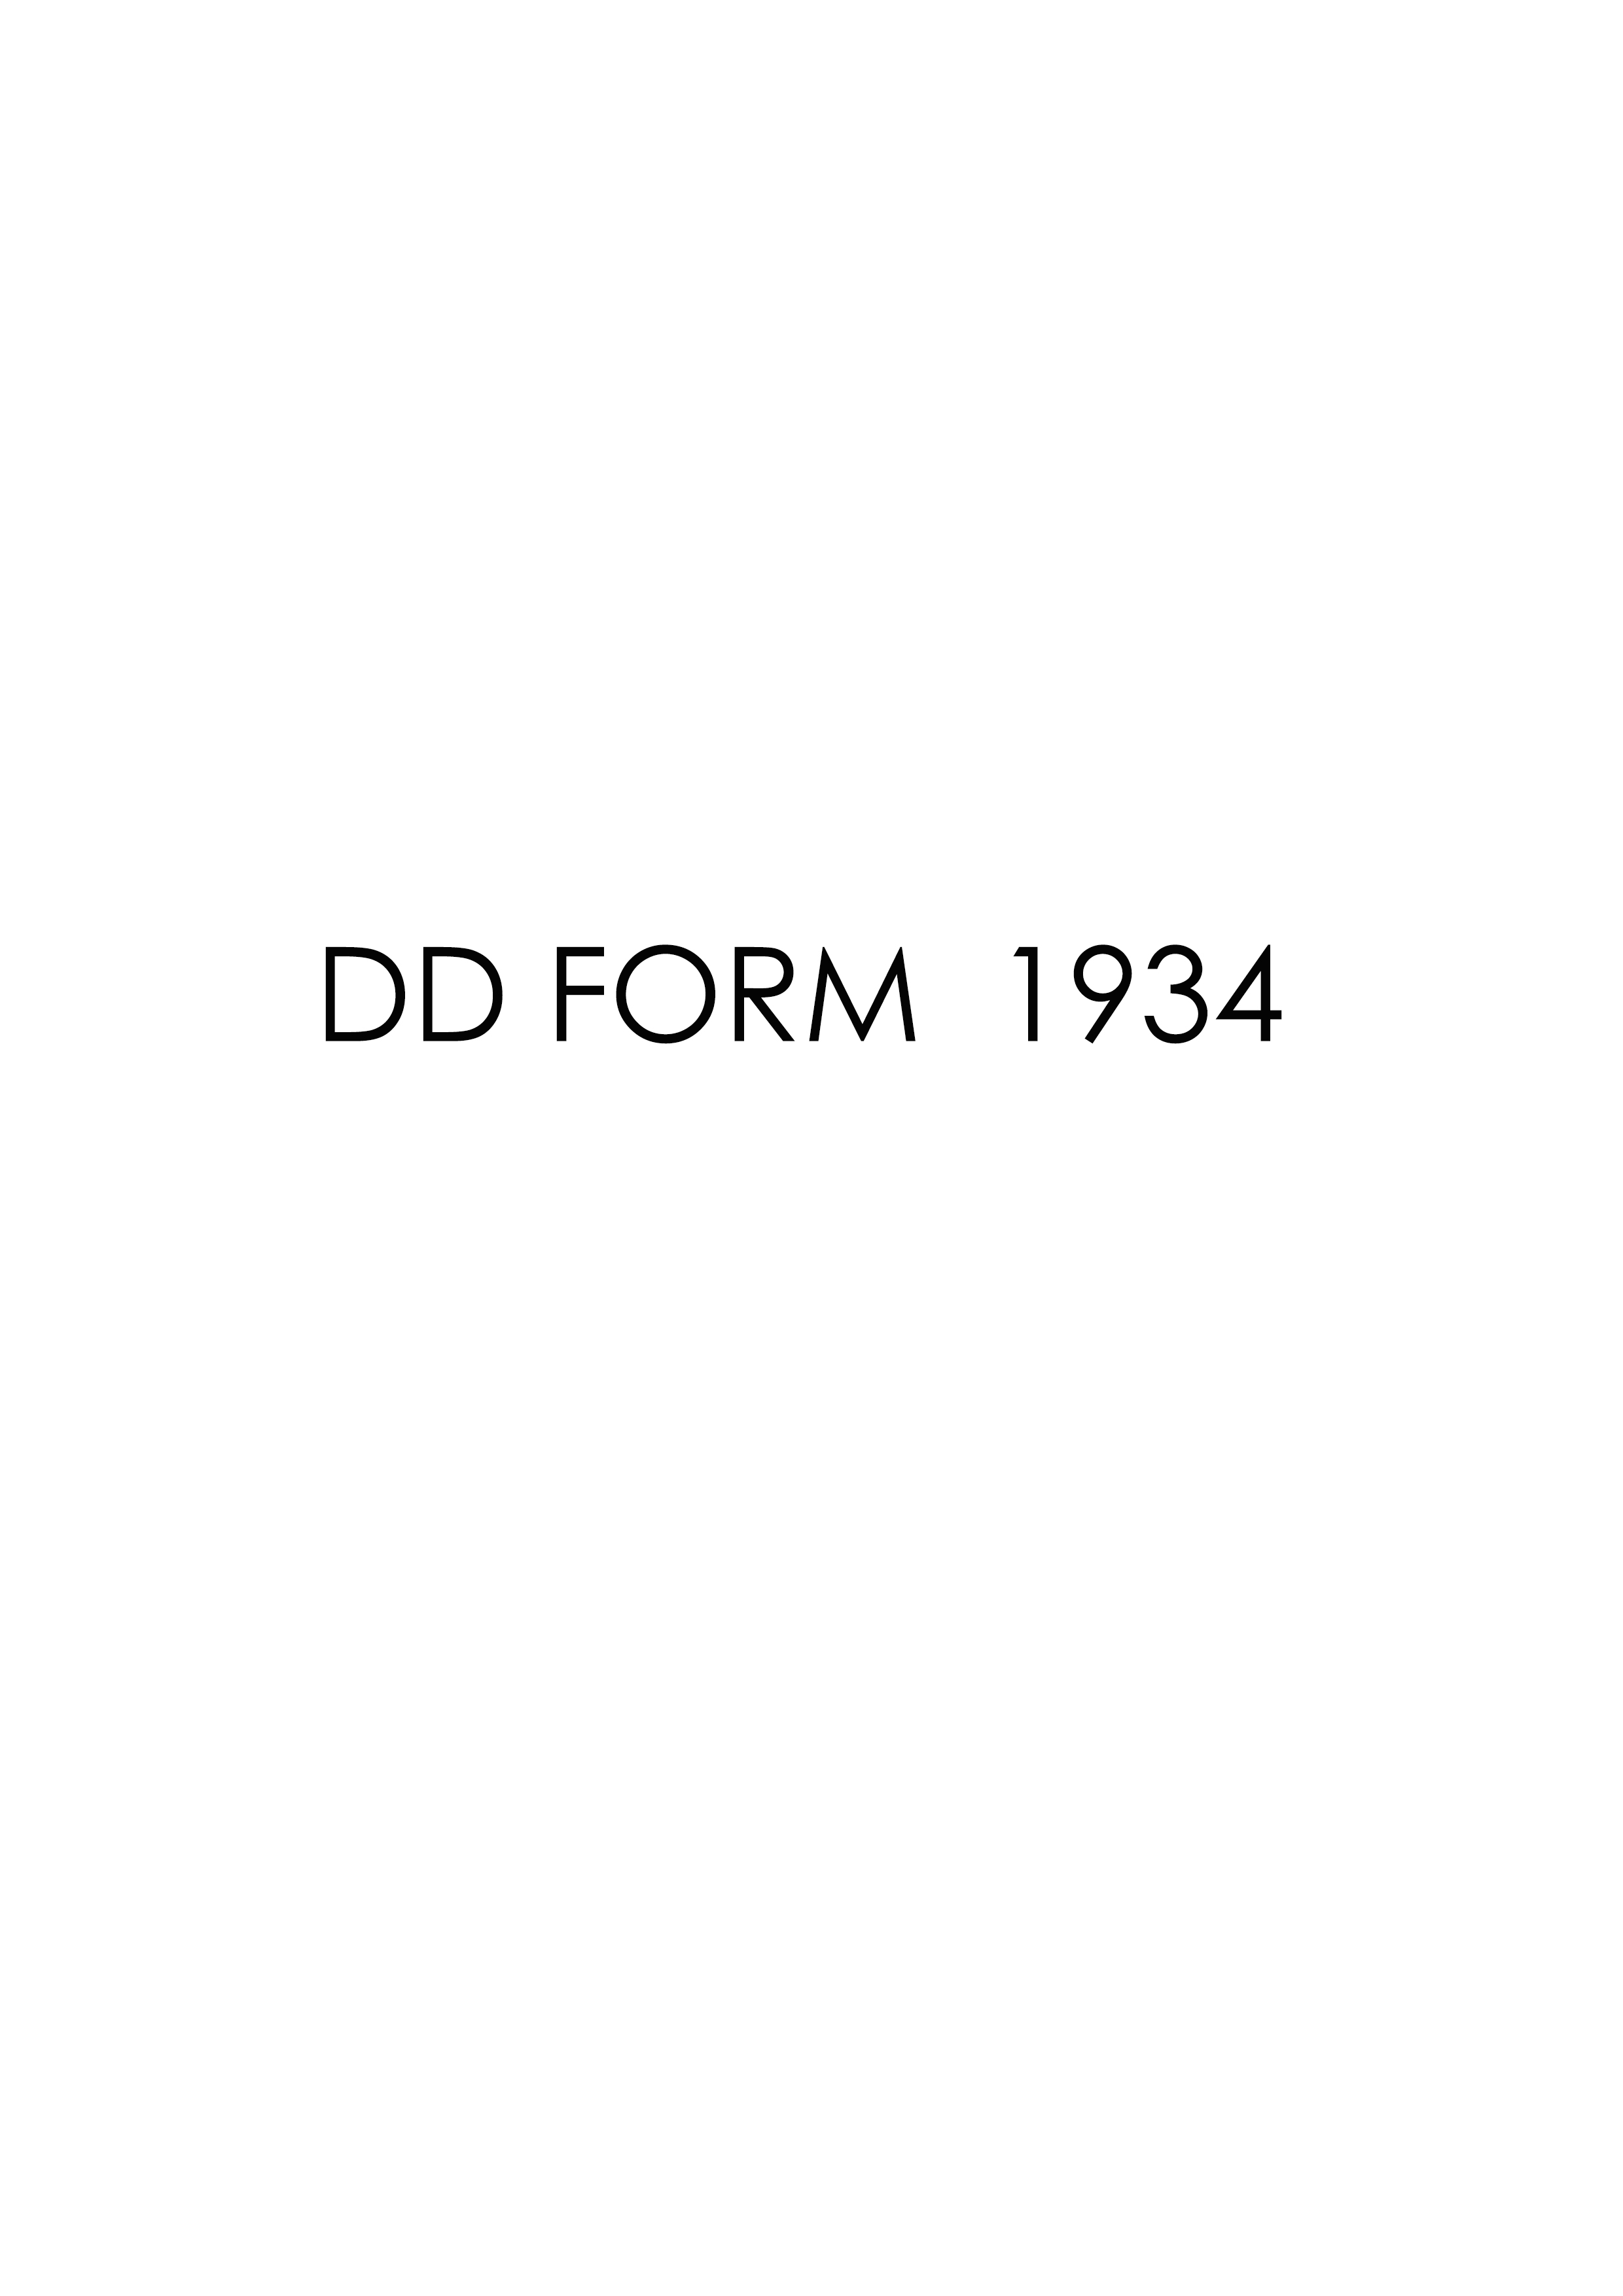 Download Fillable dd Form 1934